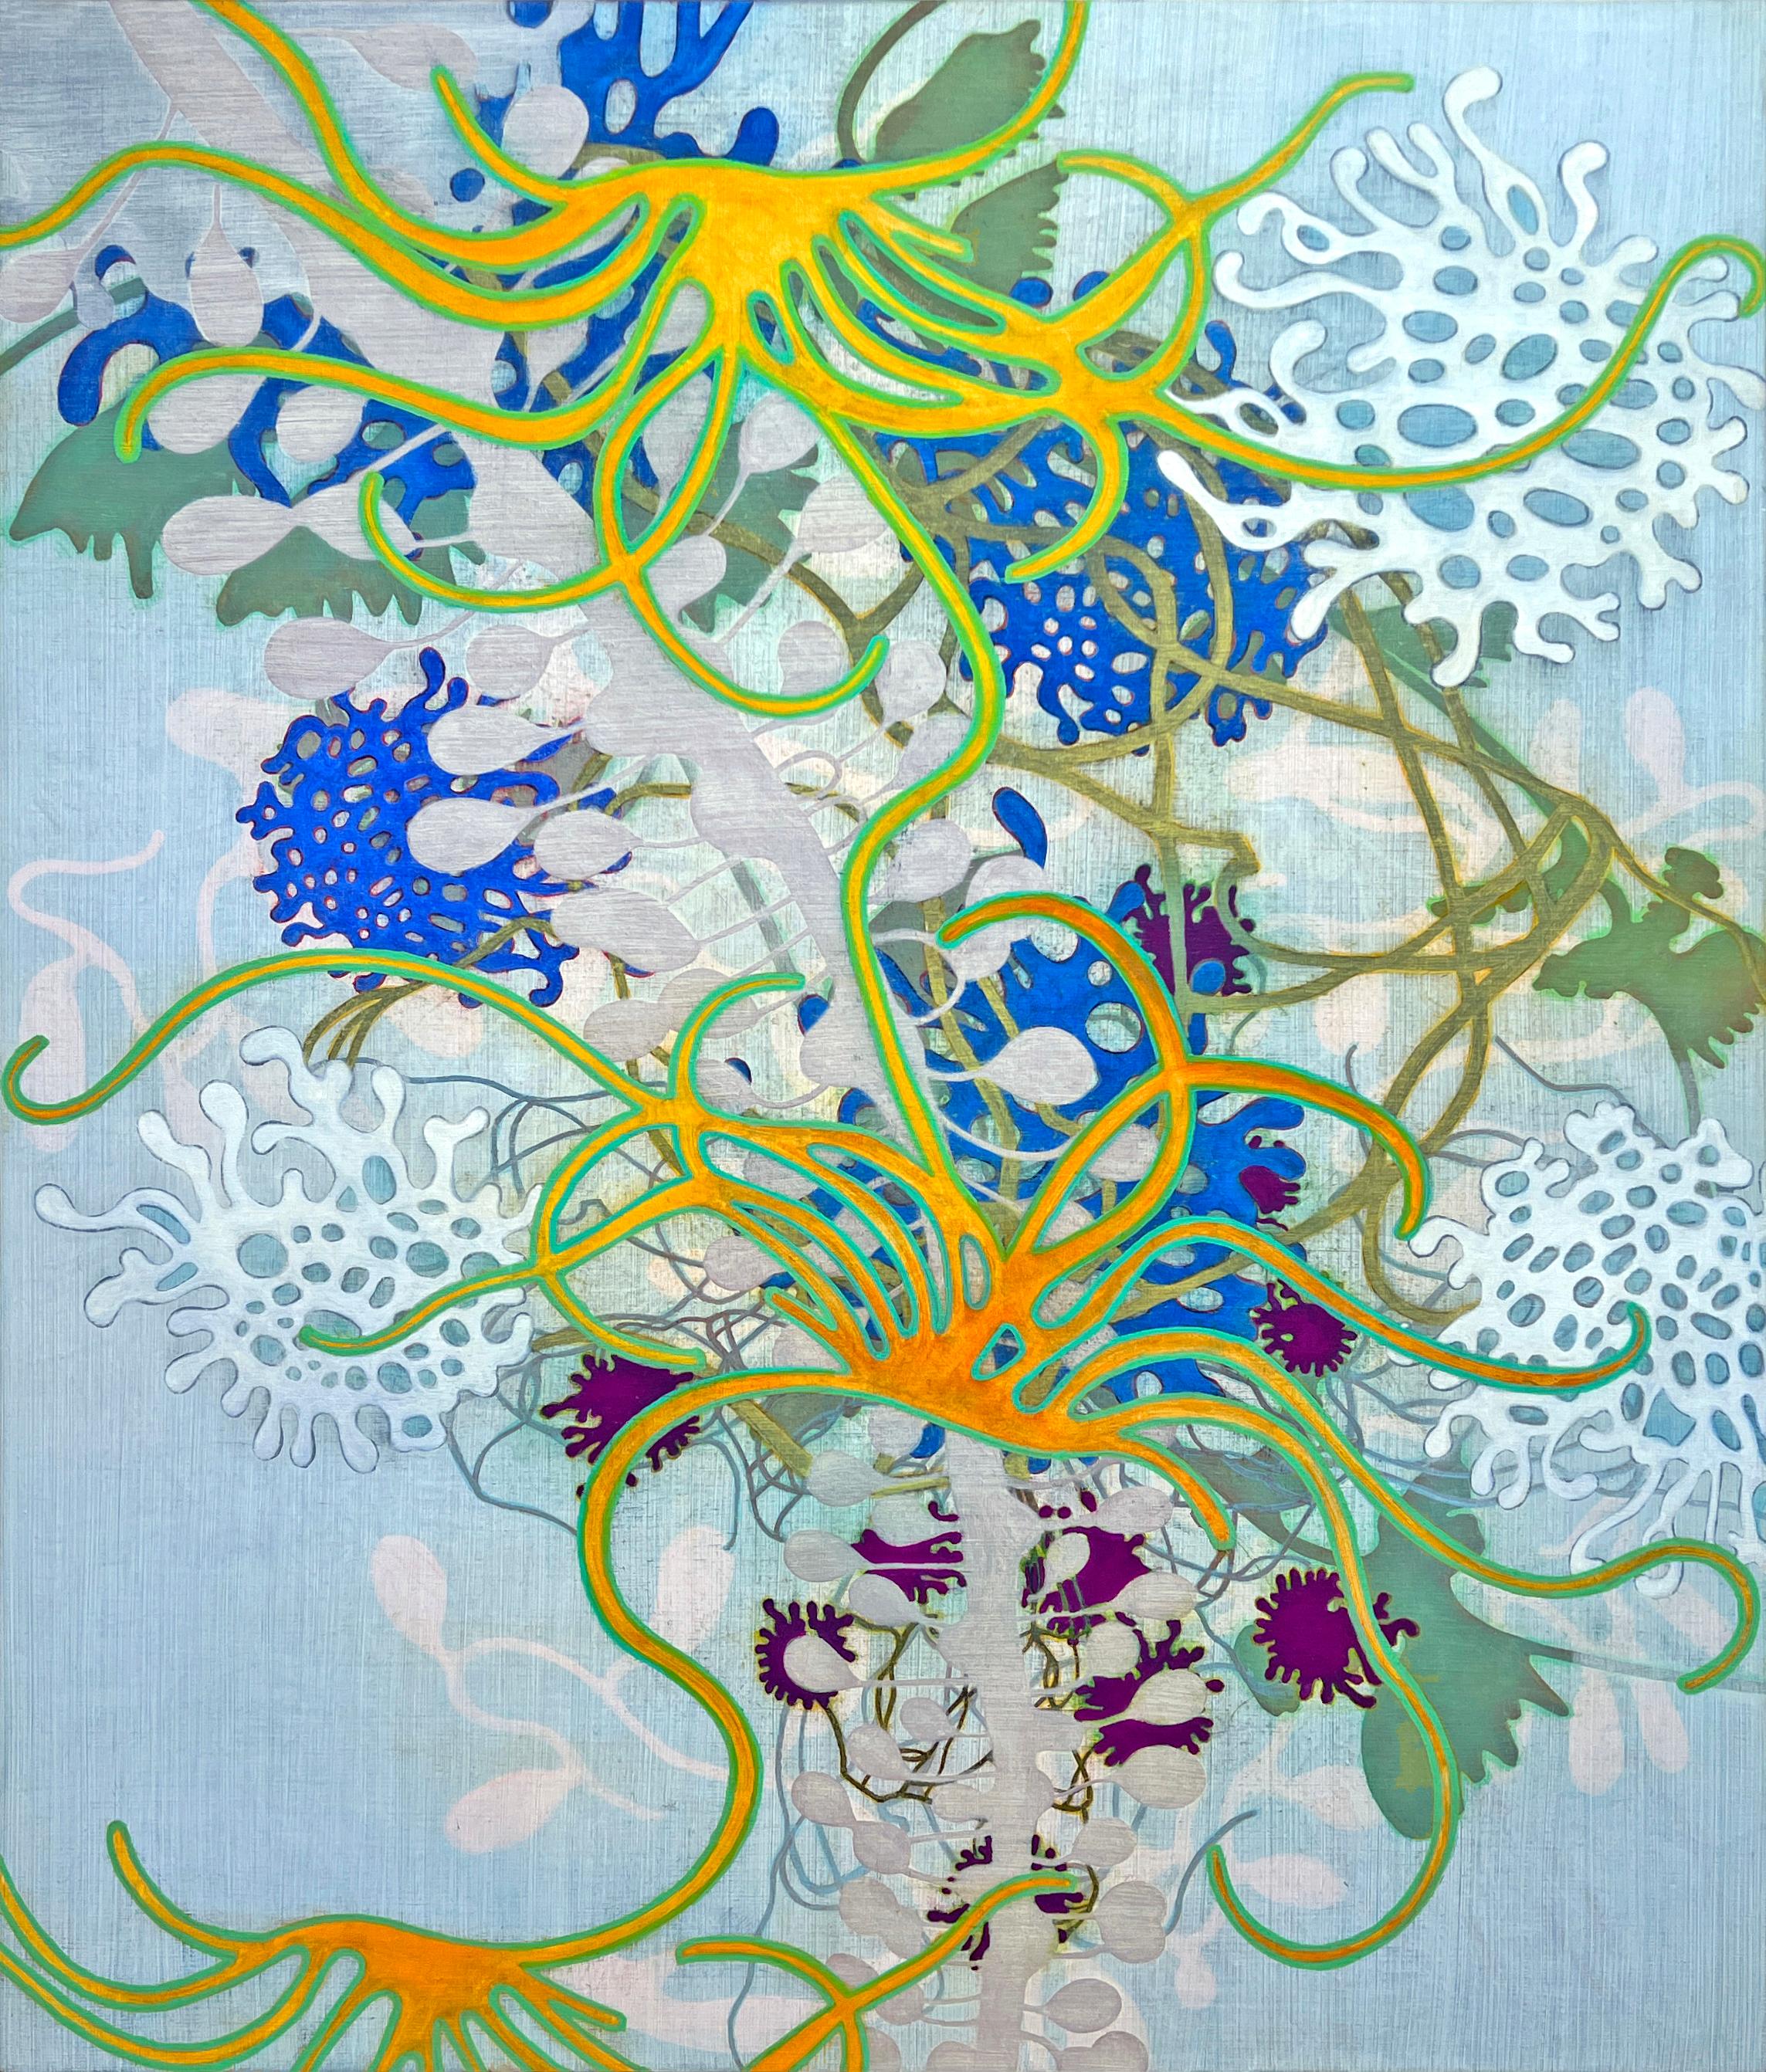 Annette Davidek Figurative Painting - #21-12 - Abstract Floral Painting / Contemporary Art / Organic Color and Form